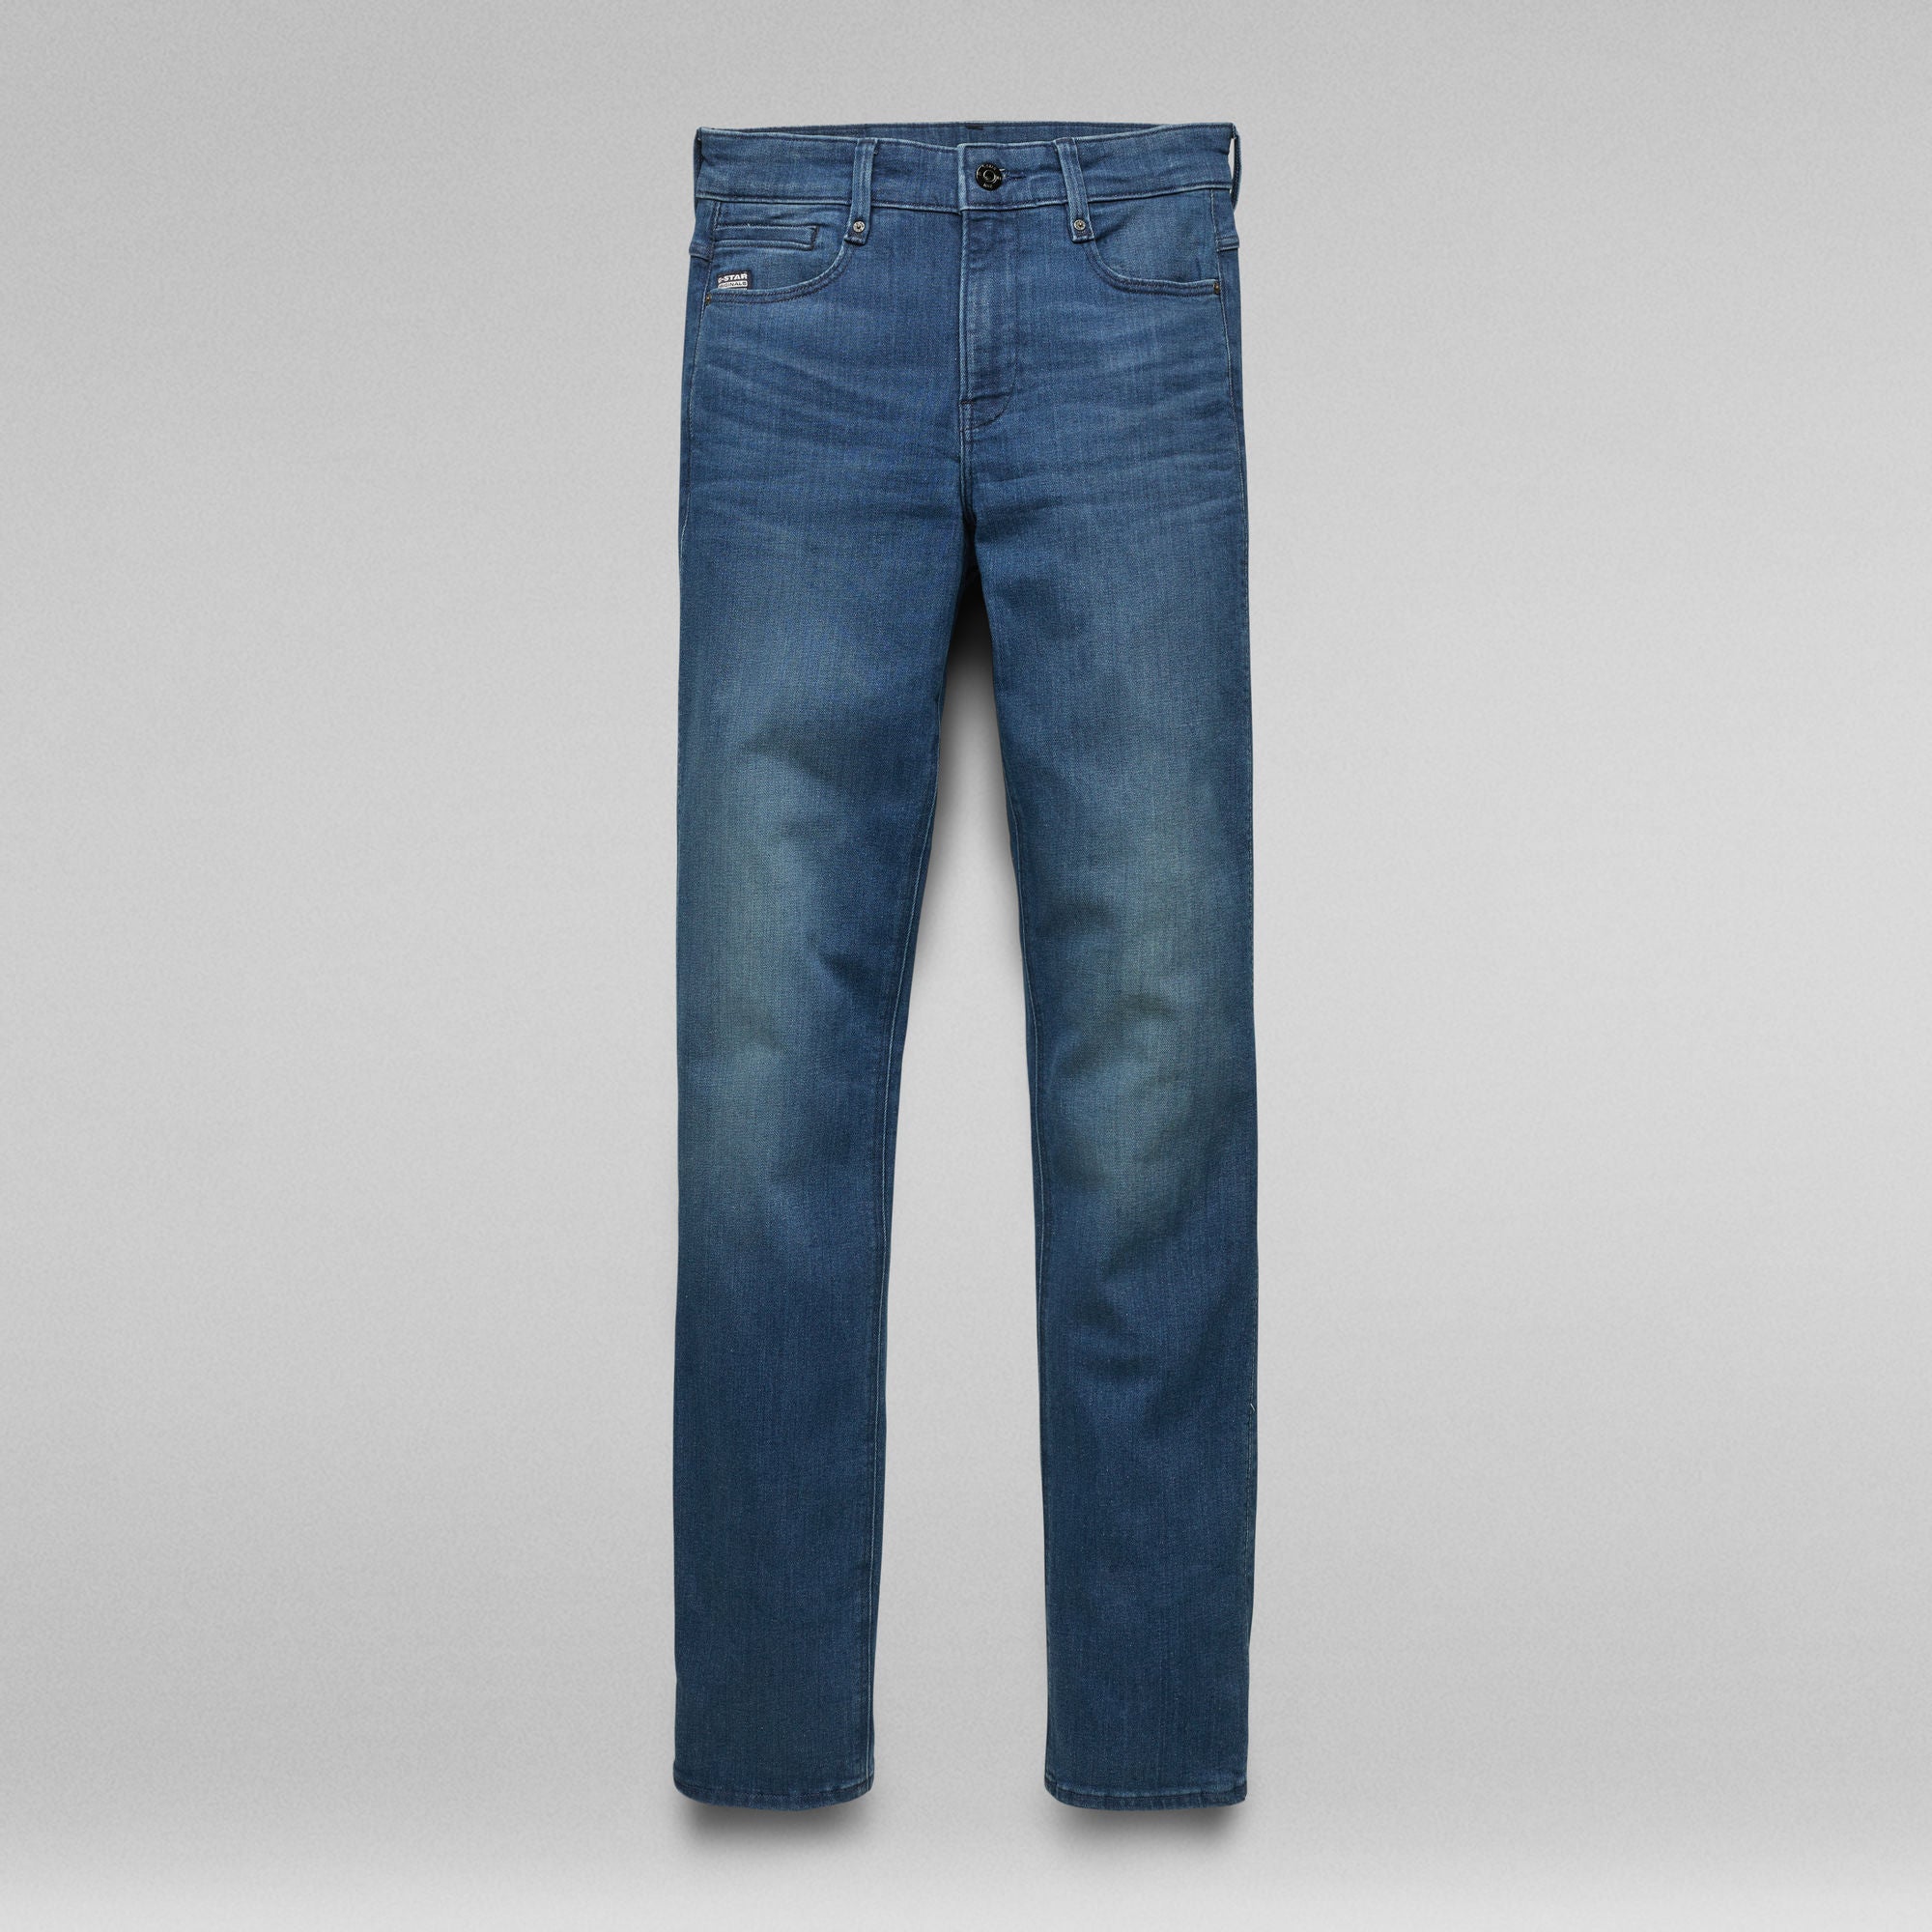 G-Star Raw - Noxer Straight Jeans - Faded Neptune Blue